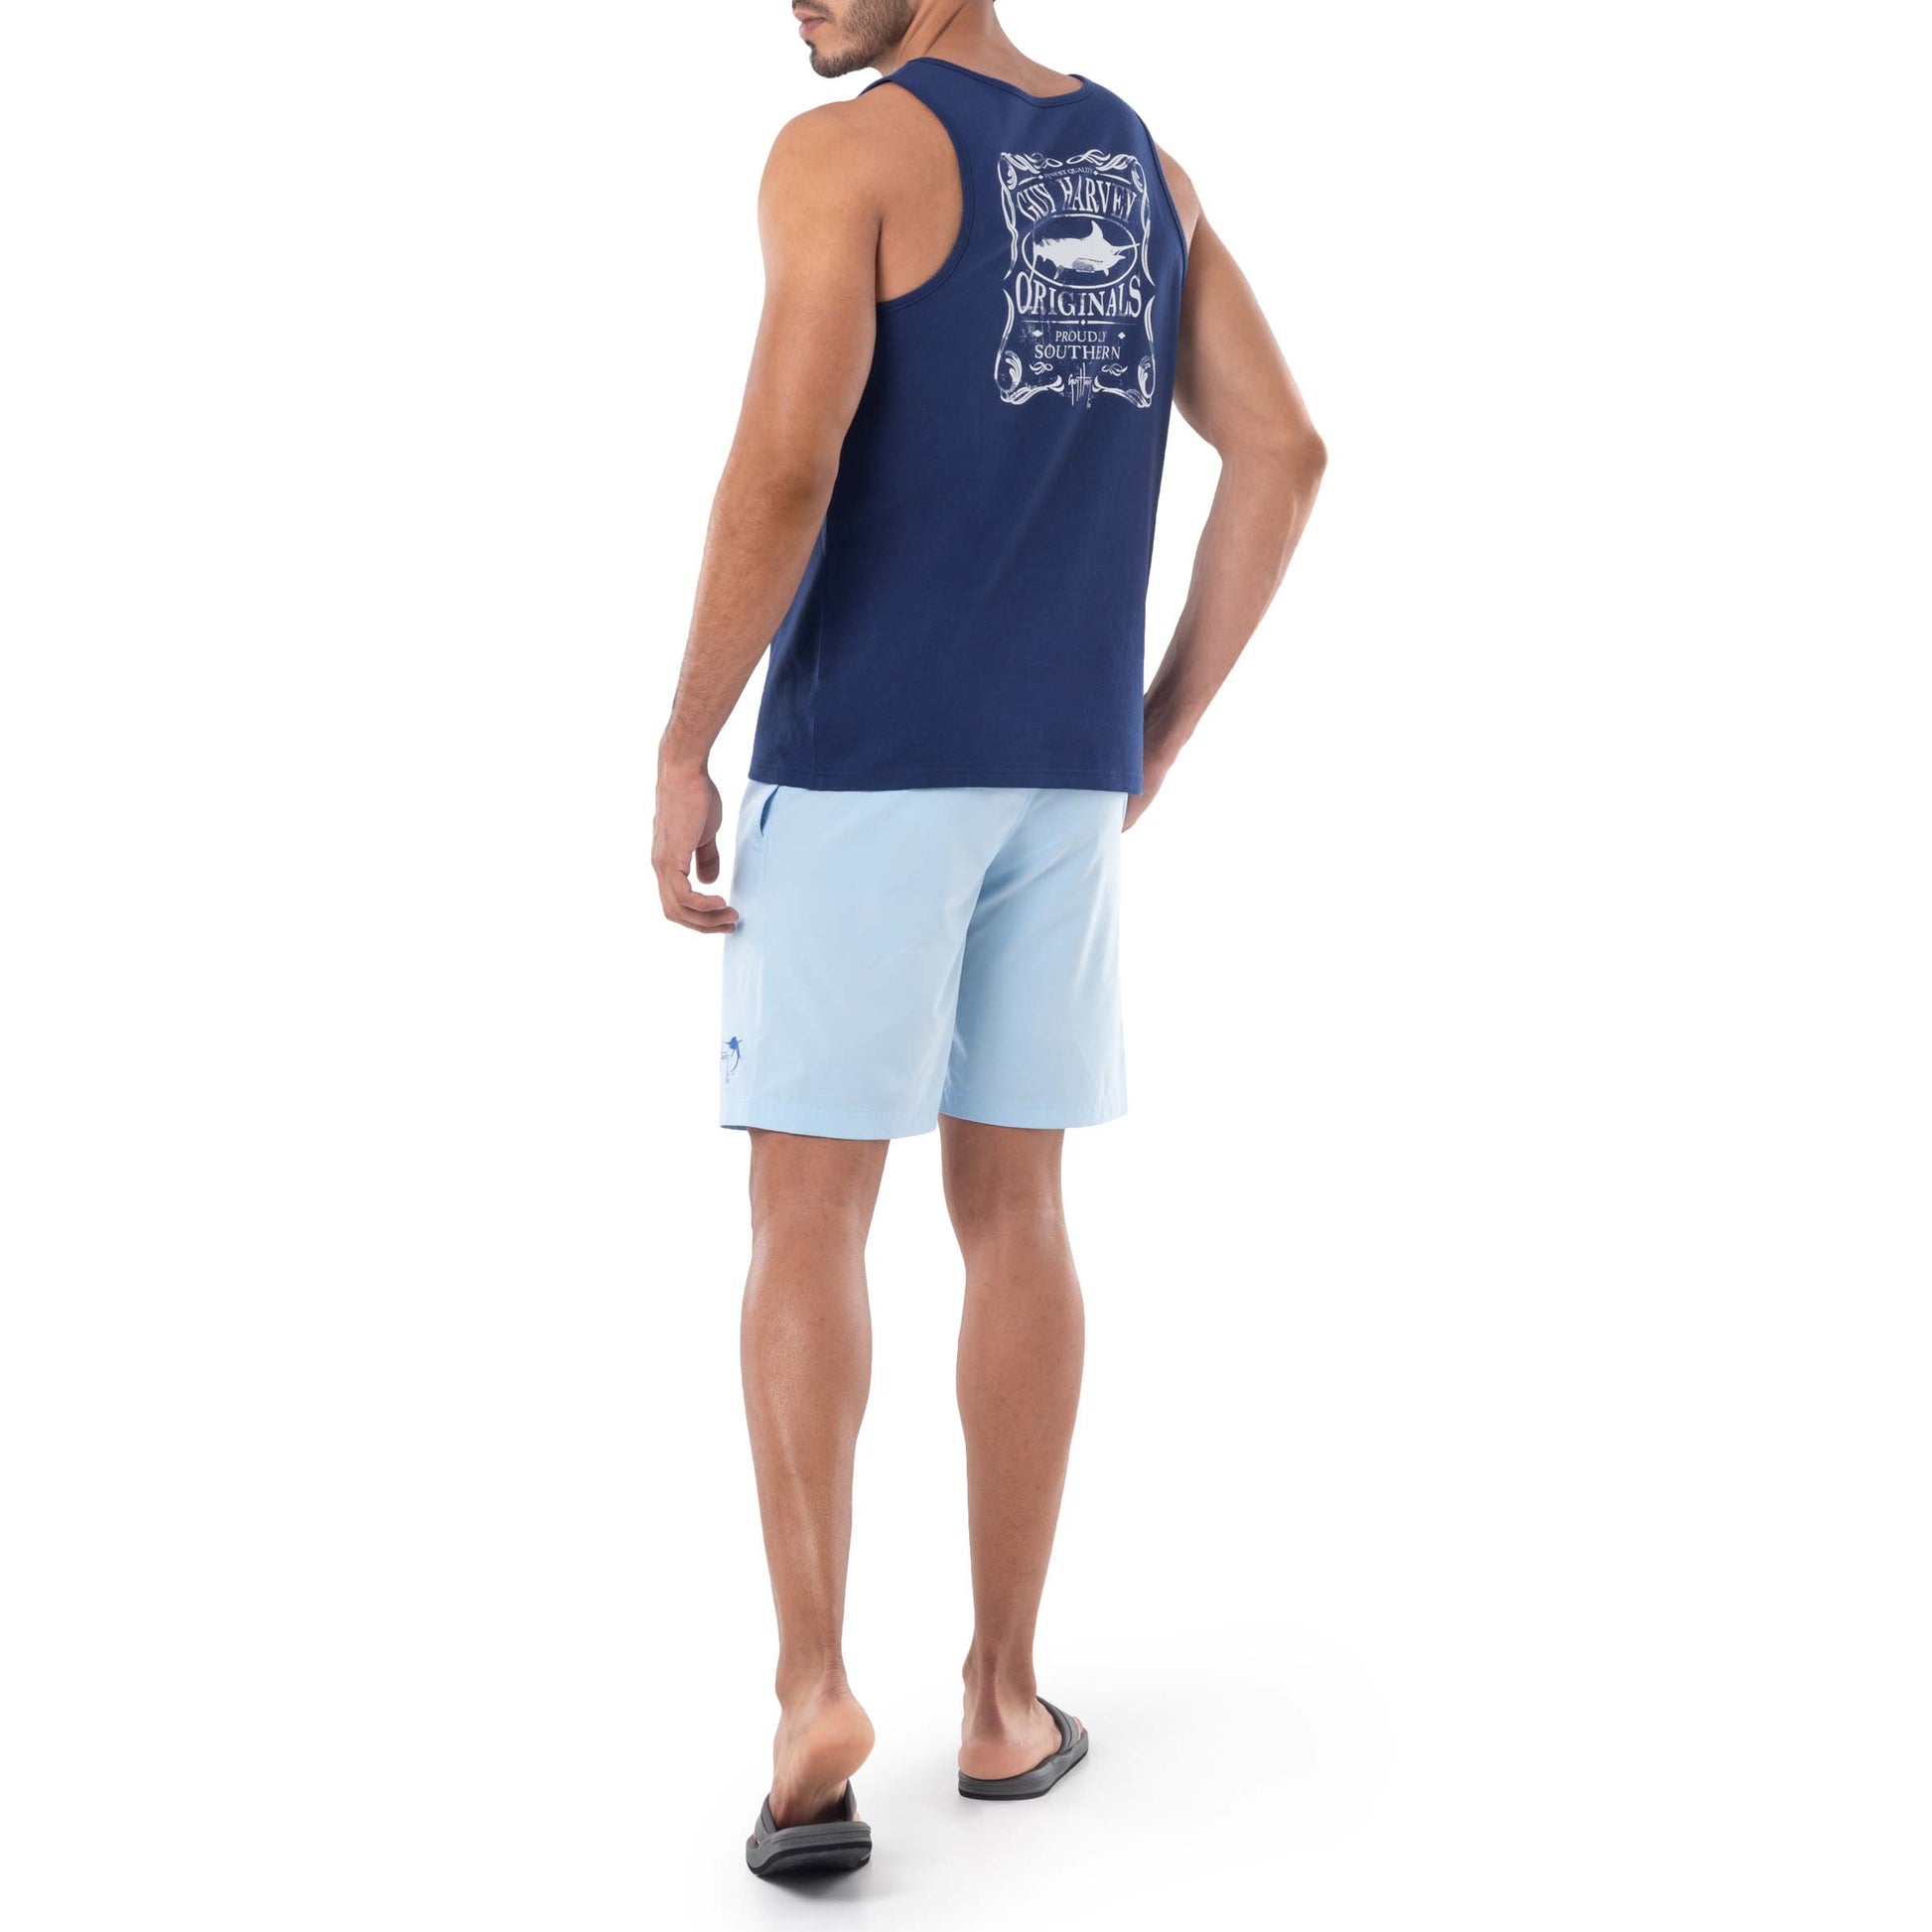 Men's Proudly Southern Navy Tank Top View 3